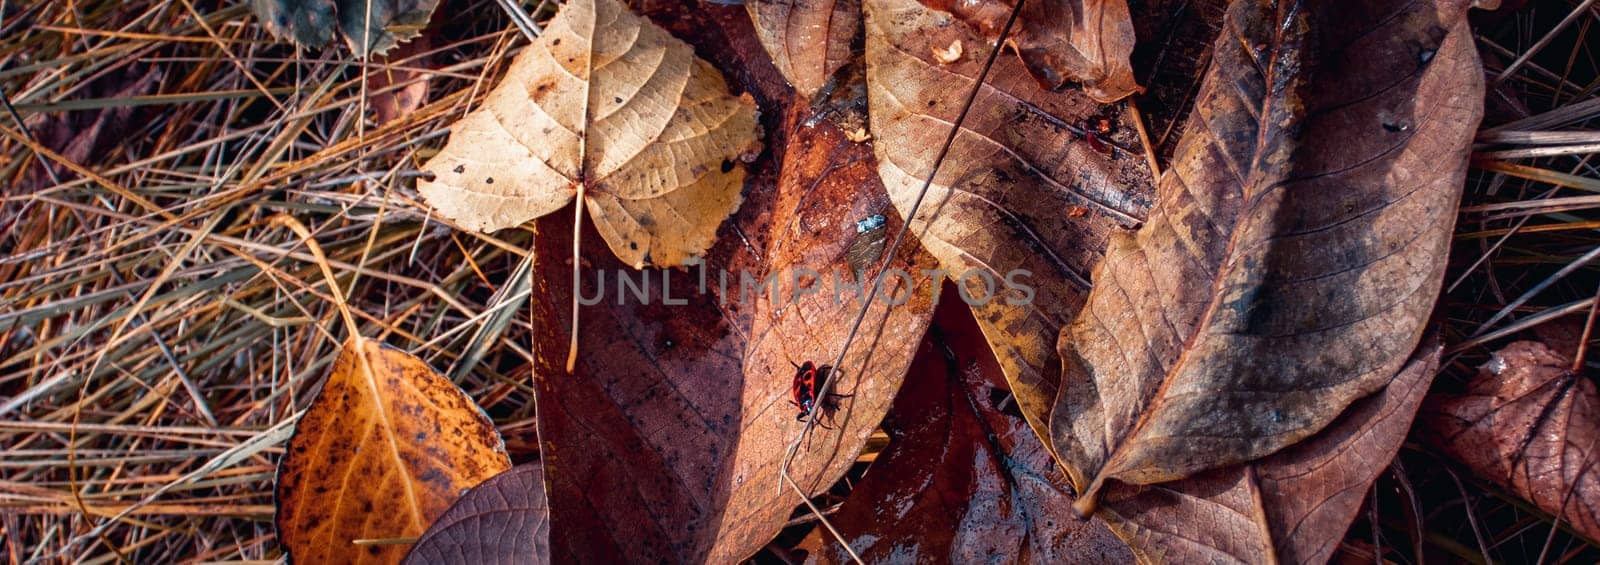 Close up autumnal leaves on ground with dew concept photo. Autumn colorful background with bug. Bright foliage with dew on grass. Fallen foliage. High quality picture for wallpaper, travel blog,